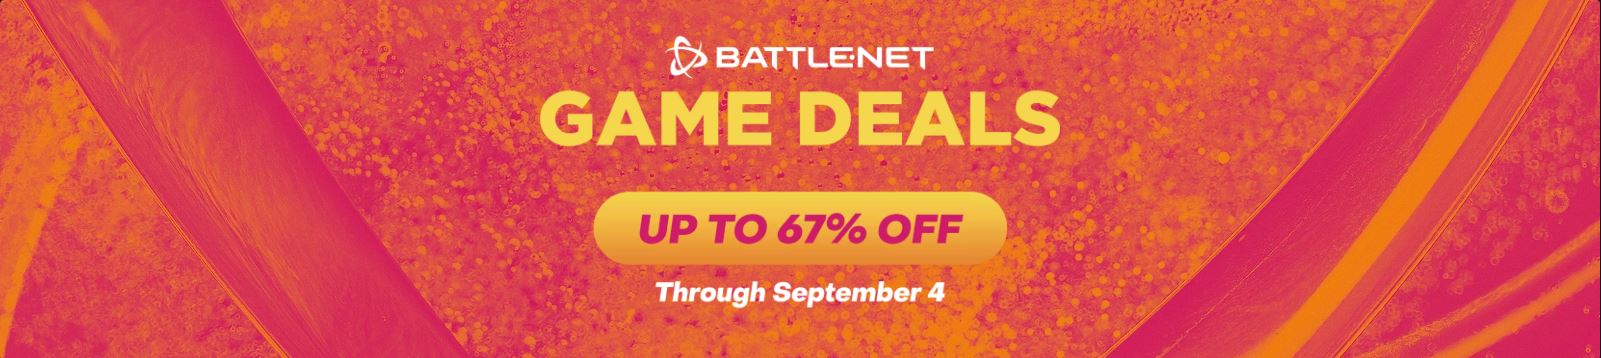 Diablo 4 On Sale, All Editions Up To 25% Off - Battle.net Game Deals -  Wowhead News